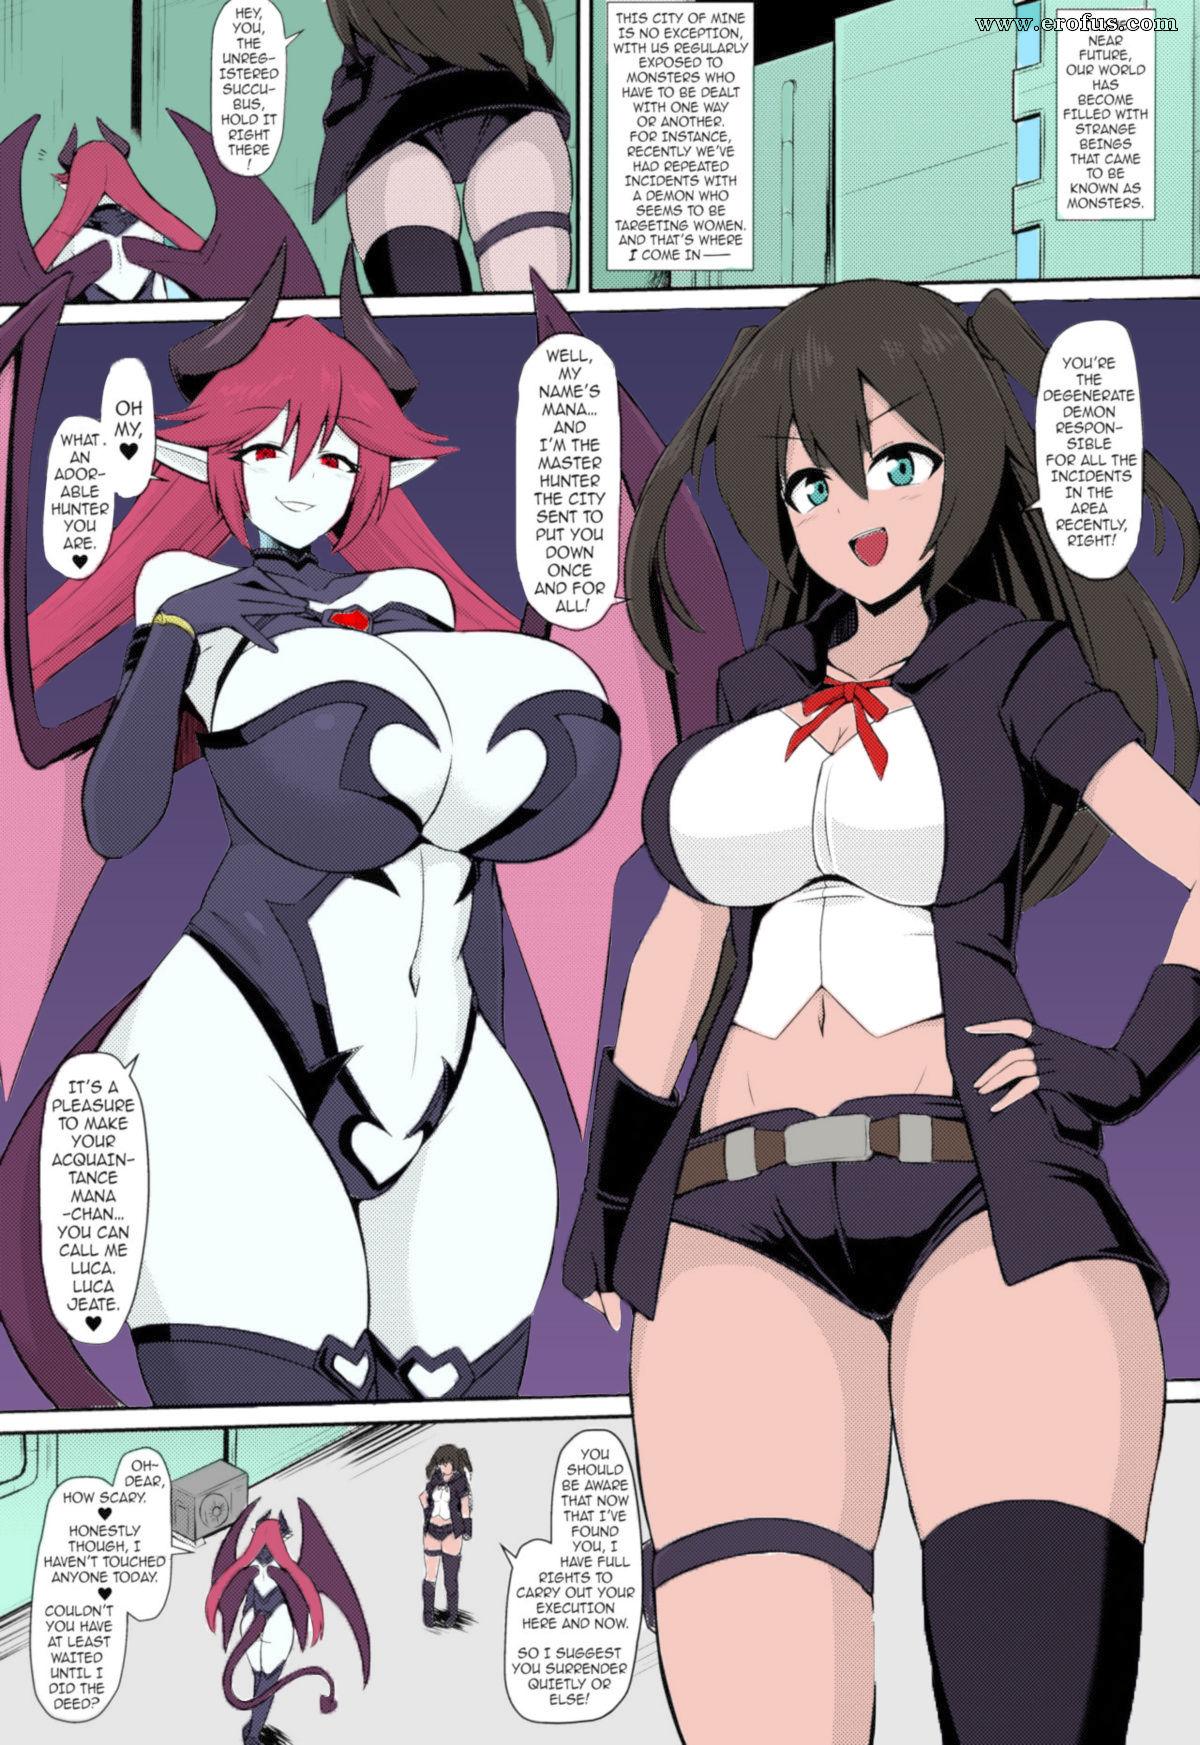 For A Lesbian Succubu´s Lust Crest Pleasure Training - COLOR- Ongoing Hugecock - Page 2